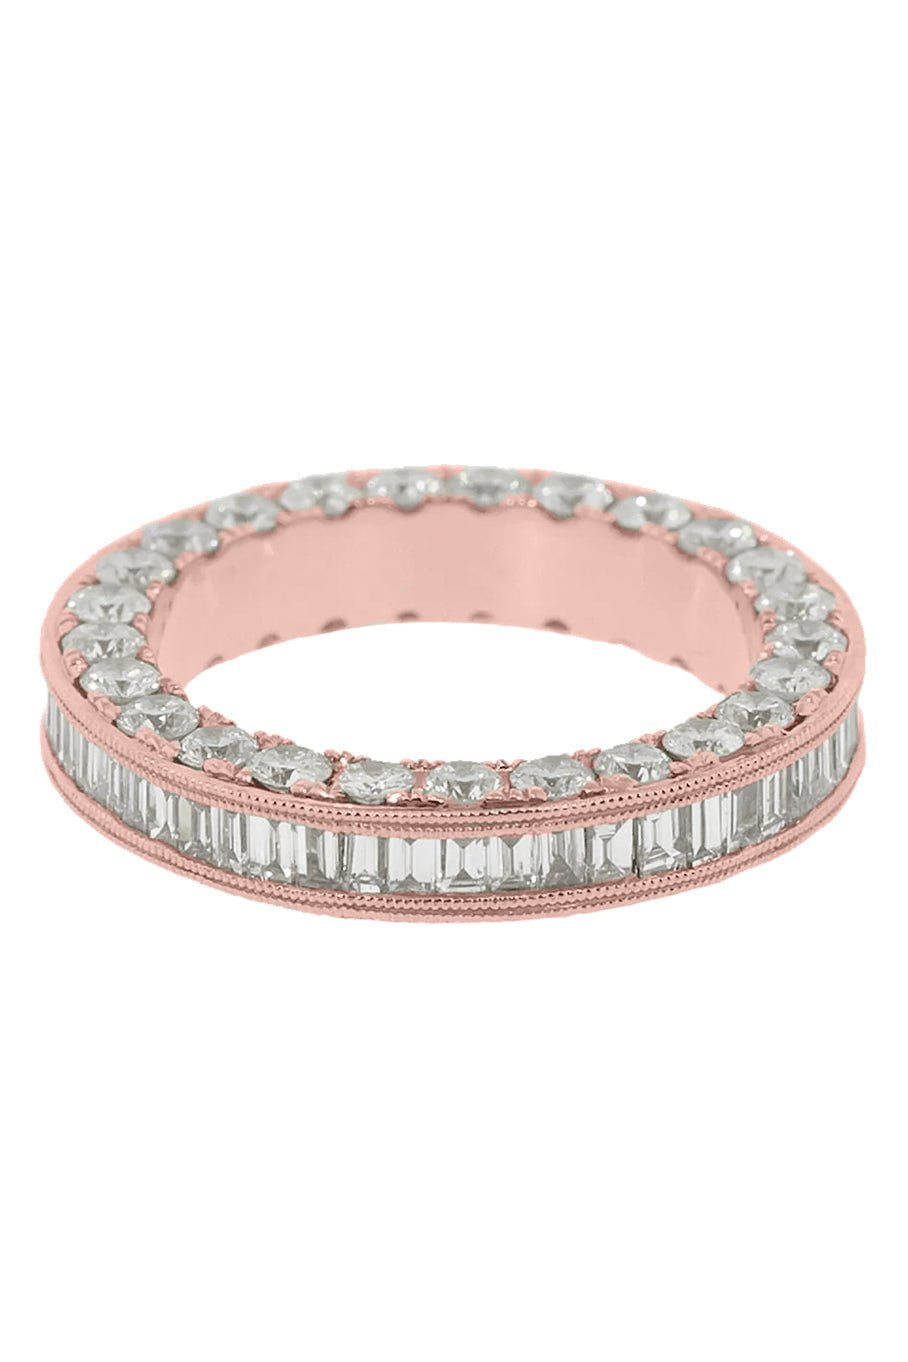 SHAY JEWELRY-3 Sided Eternity Band-ROSE GOLD